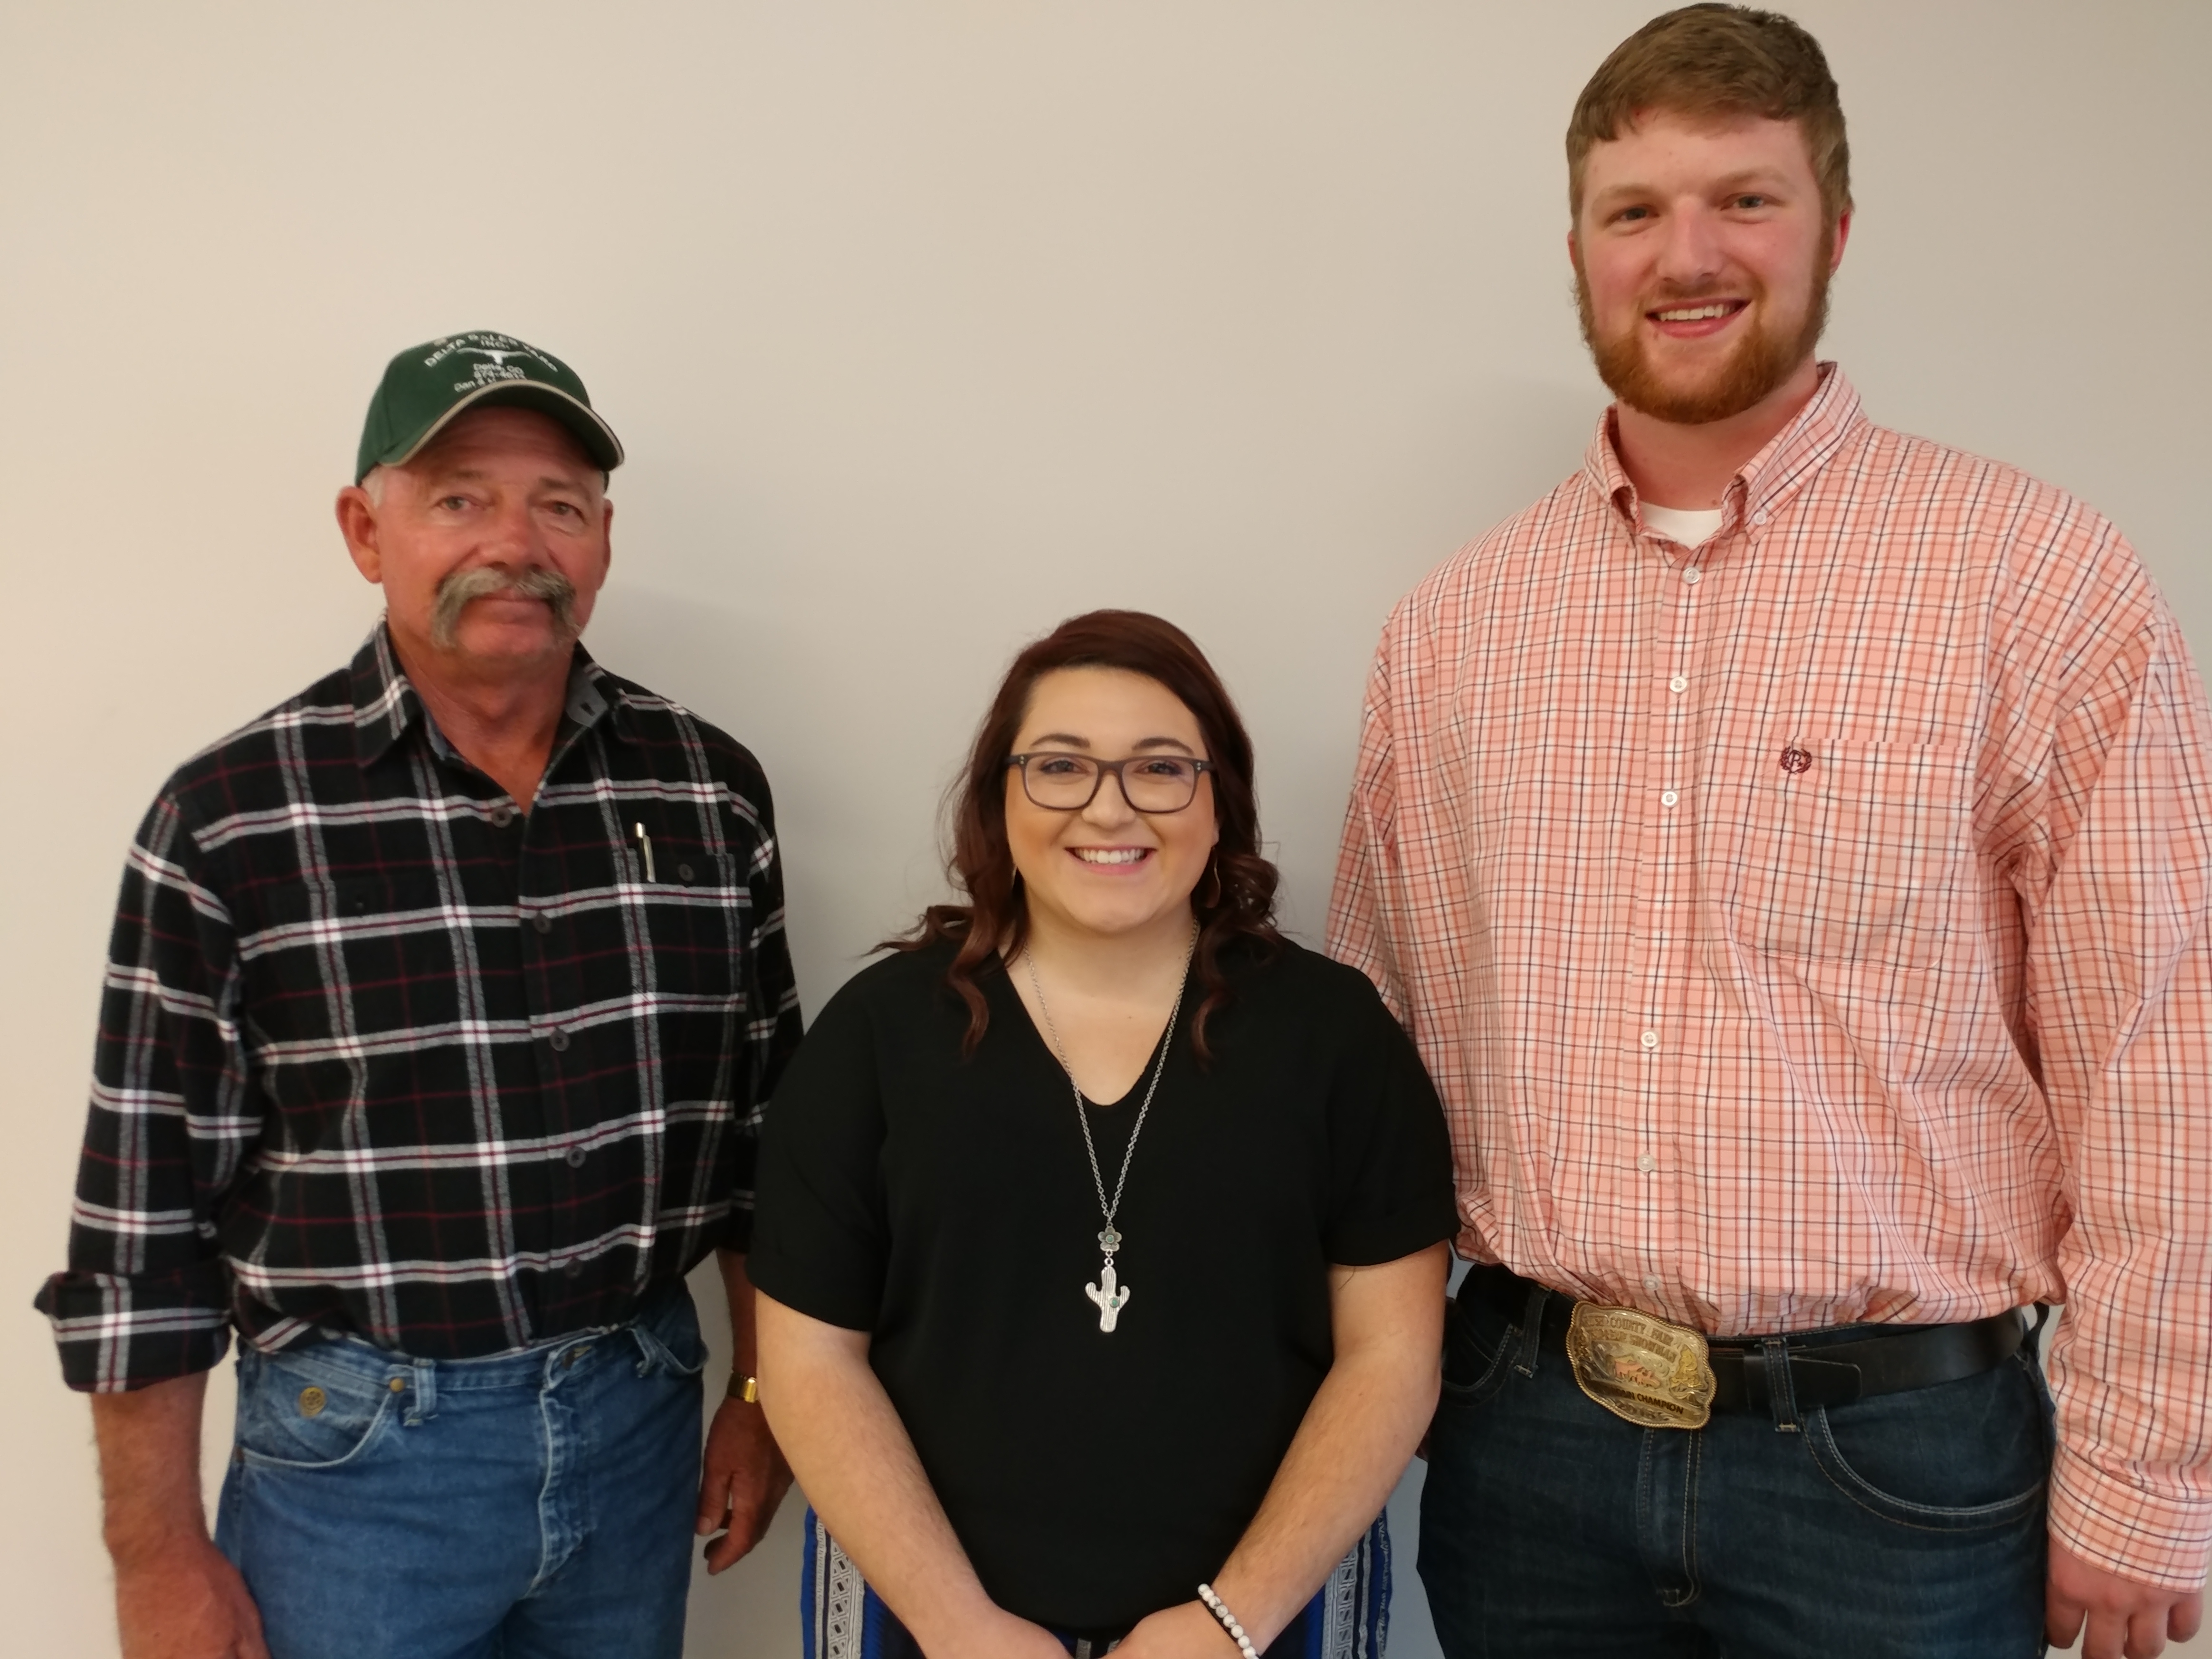 Randy Castle of Olathe, Colorado, presented the Chandie Castle Memorial Scholarships on May 1 to Darcy Stewart and Clade Anderson. (NCTA News Photo)